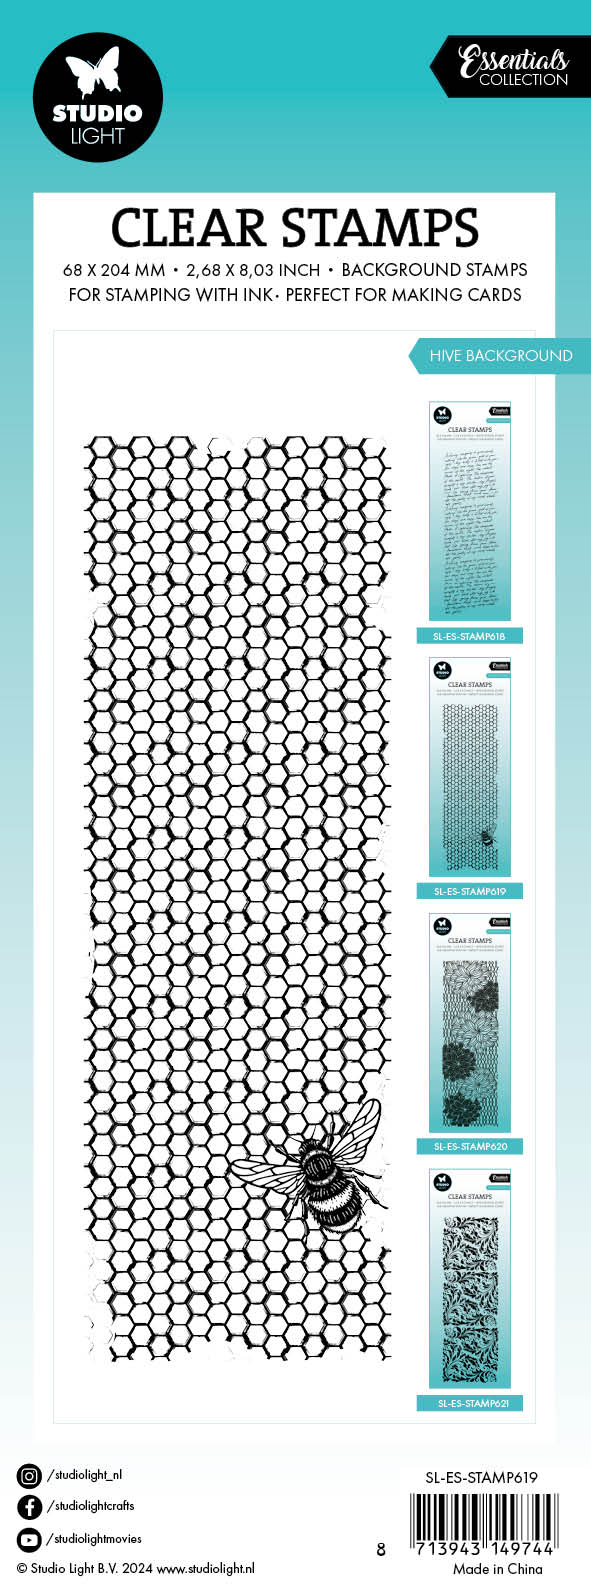 SL Clear Stamp Hive Background Essentials 1 PC